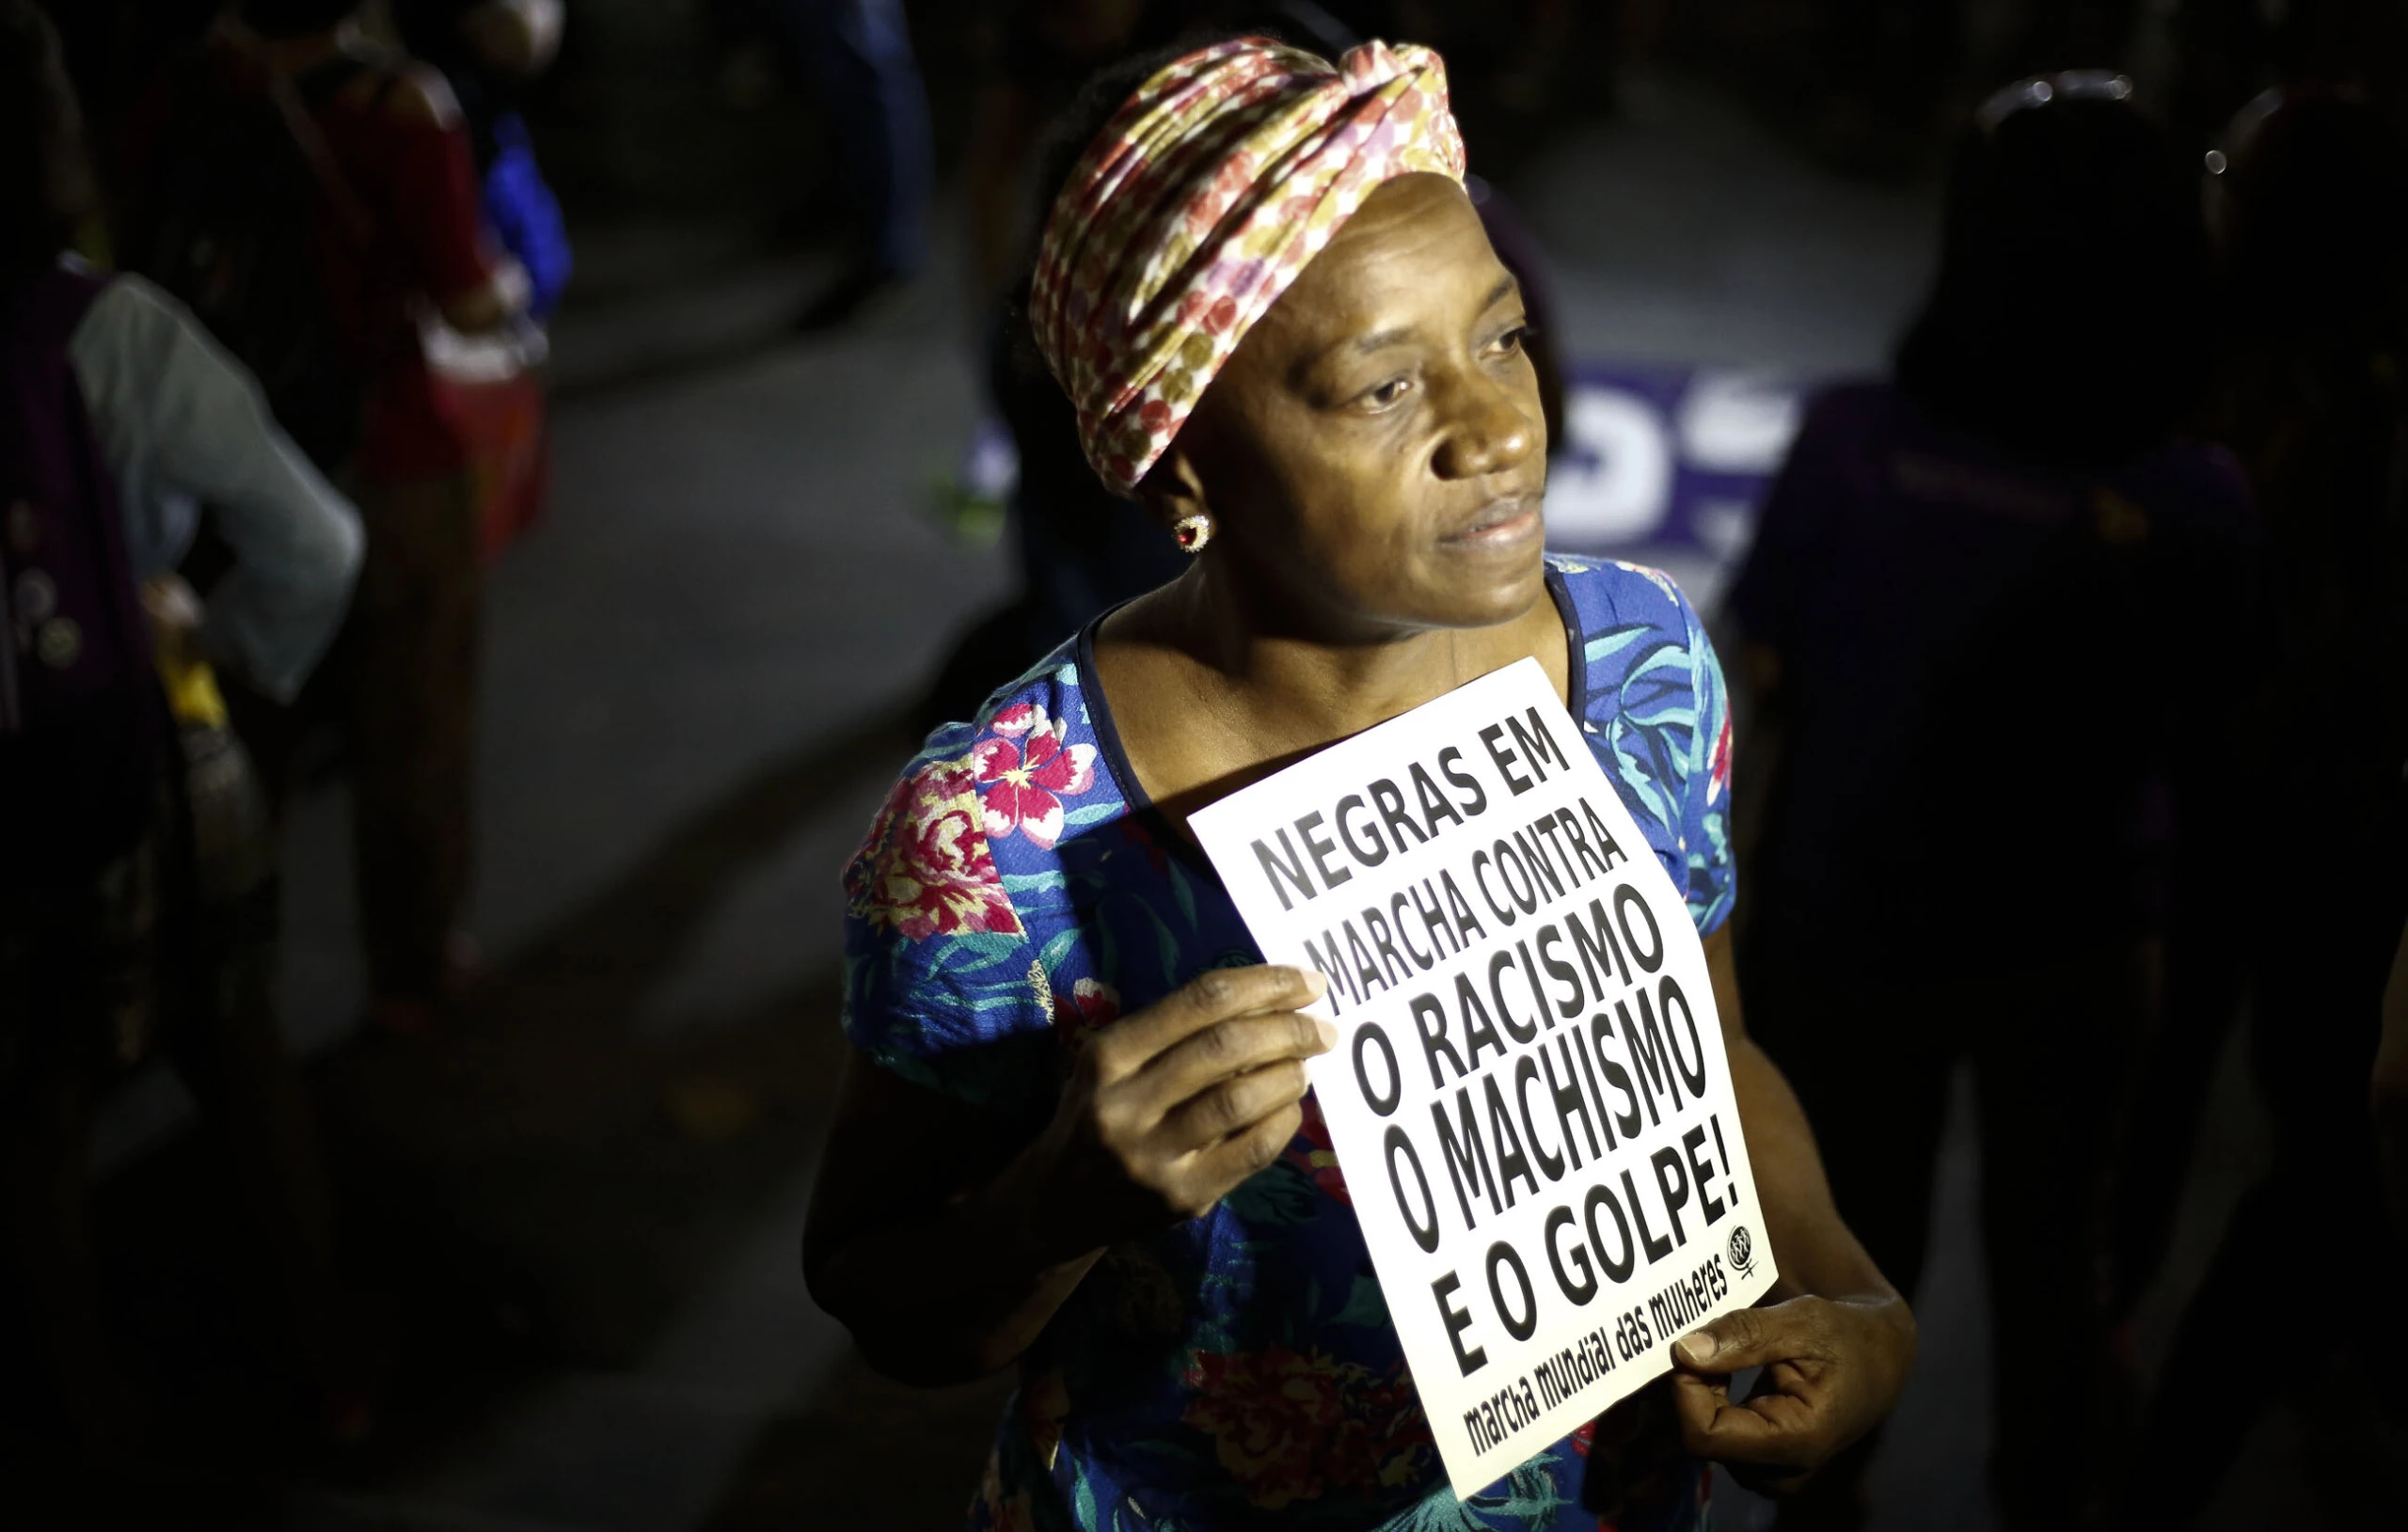 A woman holds a sign reading "Black women march against racism, male chauvinism and the coup" during a protest against the president of the Brazilian lower house Eduardo Cunha, Brazilian Vice-President Michel Temer and Jair Bolsonaro -a far right member of Congress who has praised Brazil's former military dictatorship and torture of opponents in the 1970s- in Sao Paulo, Brazil on April 26, 2016. Six out of 10 Brazilians want snap elections to resolve the country's political crisis in which leftist President Dilma Rousseff faces impeachment, a poll released Tuesday said. / AFP / Miguel Schincariol        (Photo credit should read MIGUEL SCHINCARIOL/AFP/Getty Images)